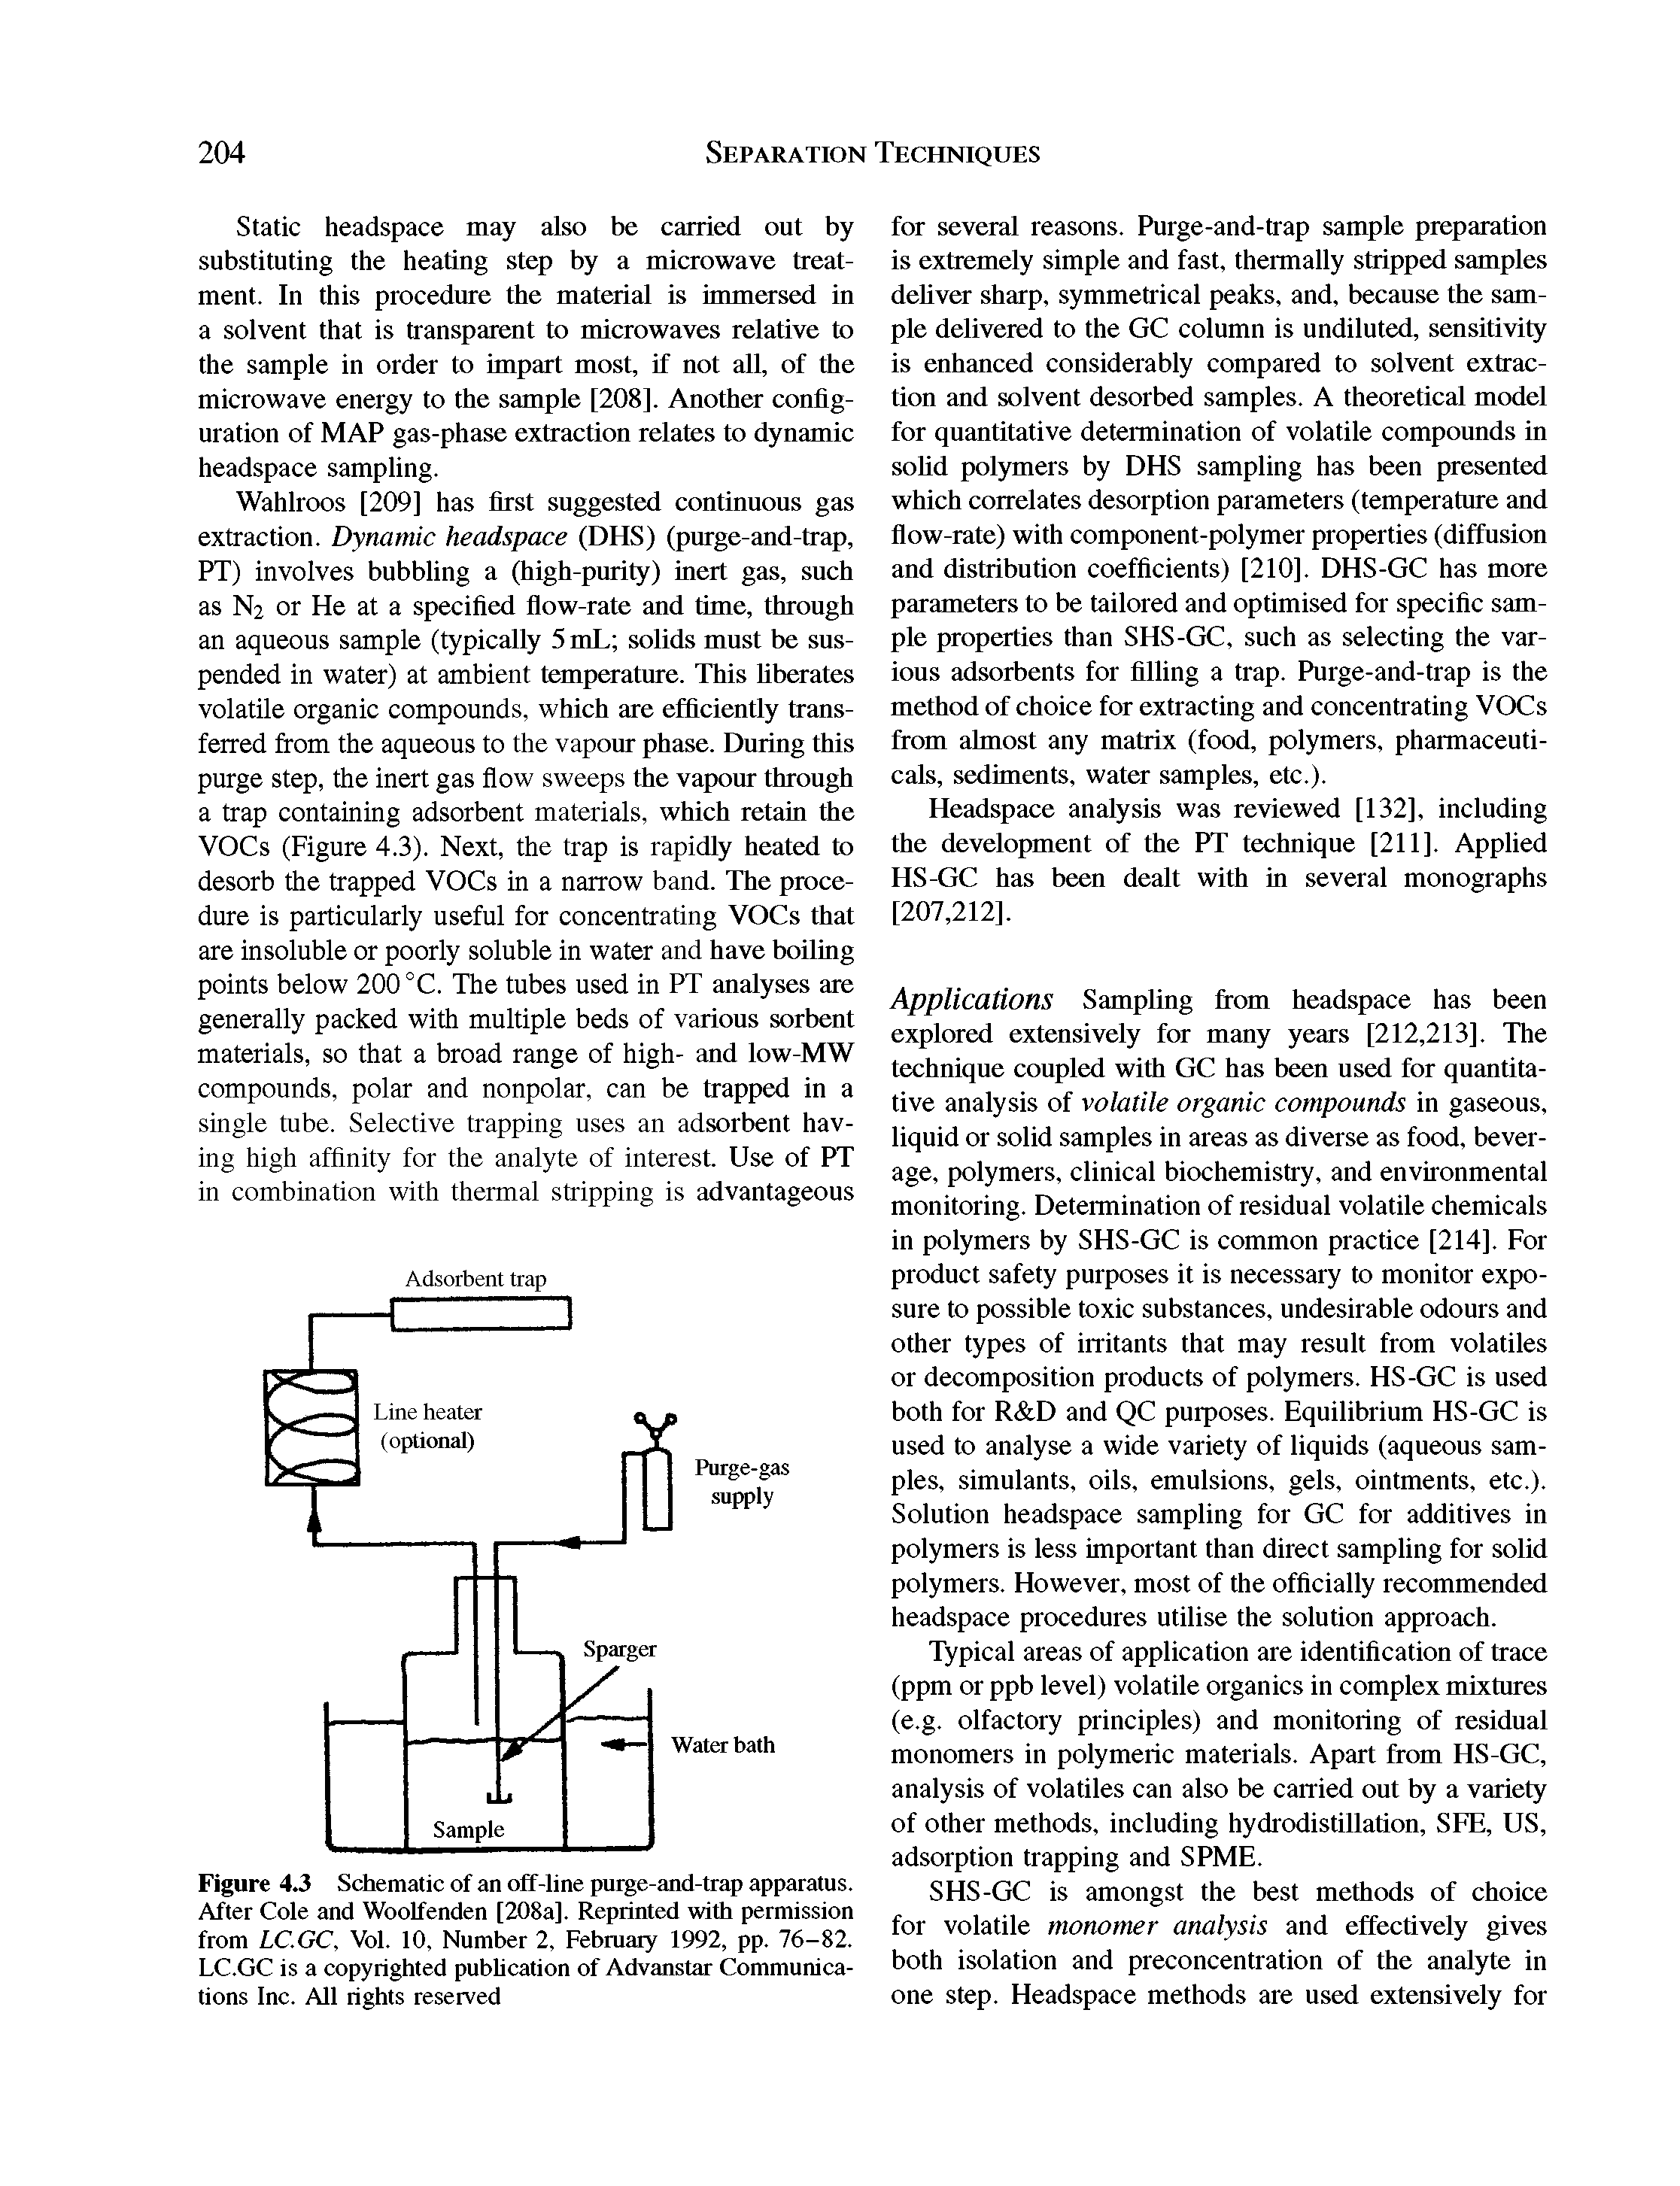 Figure 4.3 Schematic of an off-line purge-and-trap apparatus. After Cole and Woolfenden [208a]. Reprinted with permission from LC.GC, Vol. 10, Number 2, February 1992, pp. 76-82. LC.GC is a copyrighted publication of Advanstar Communications Inc. All rights reserved...